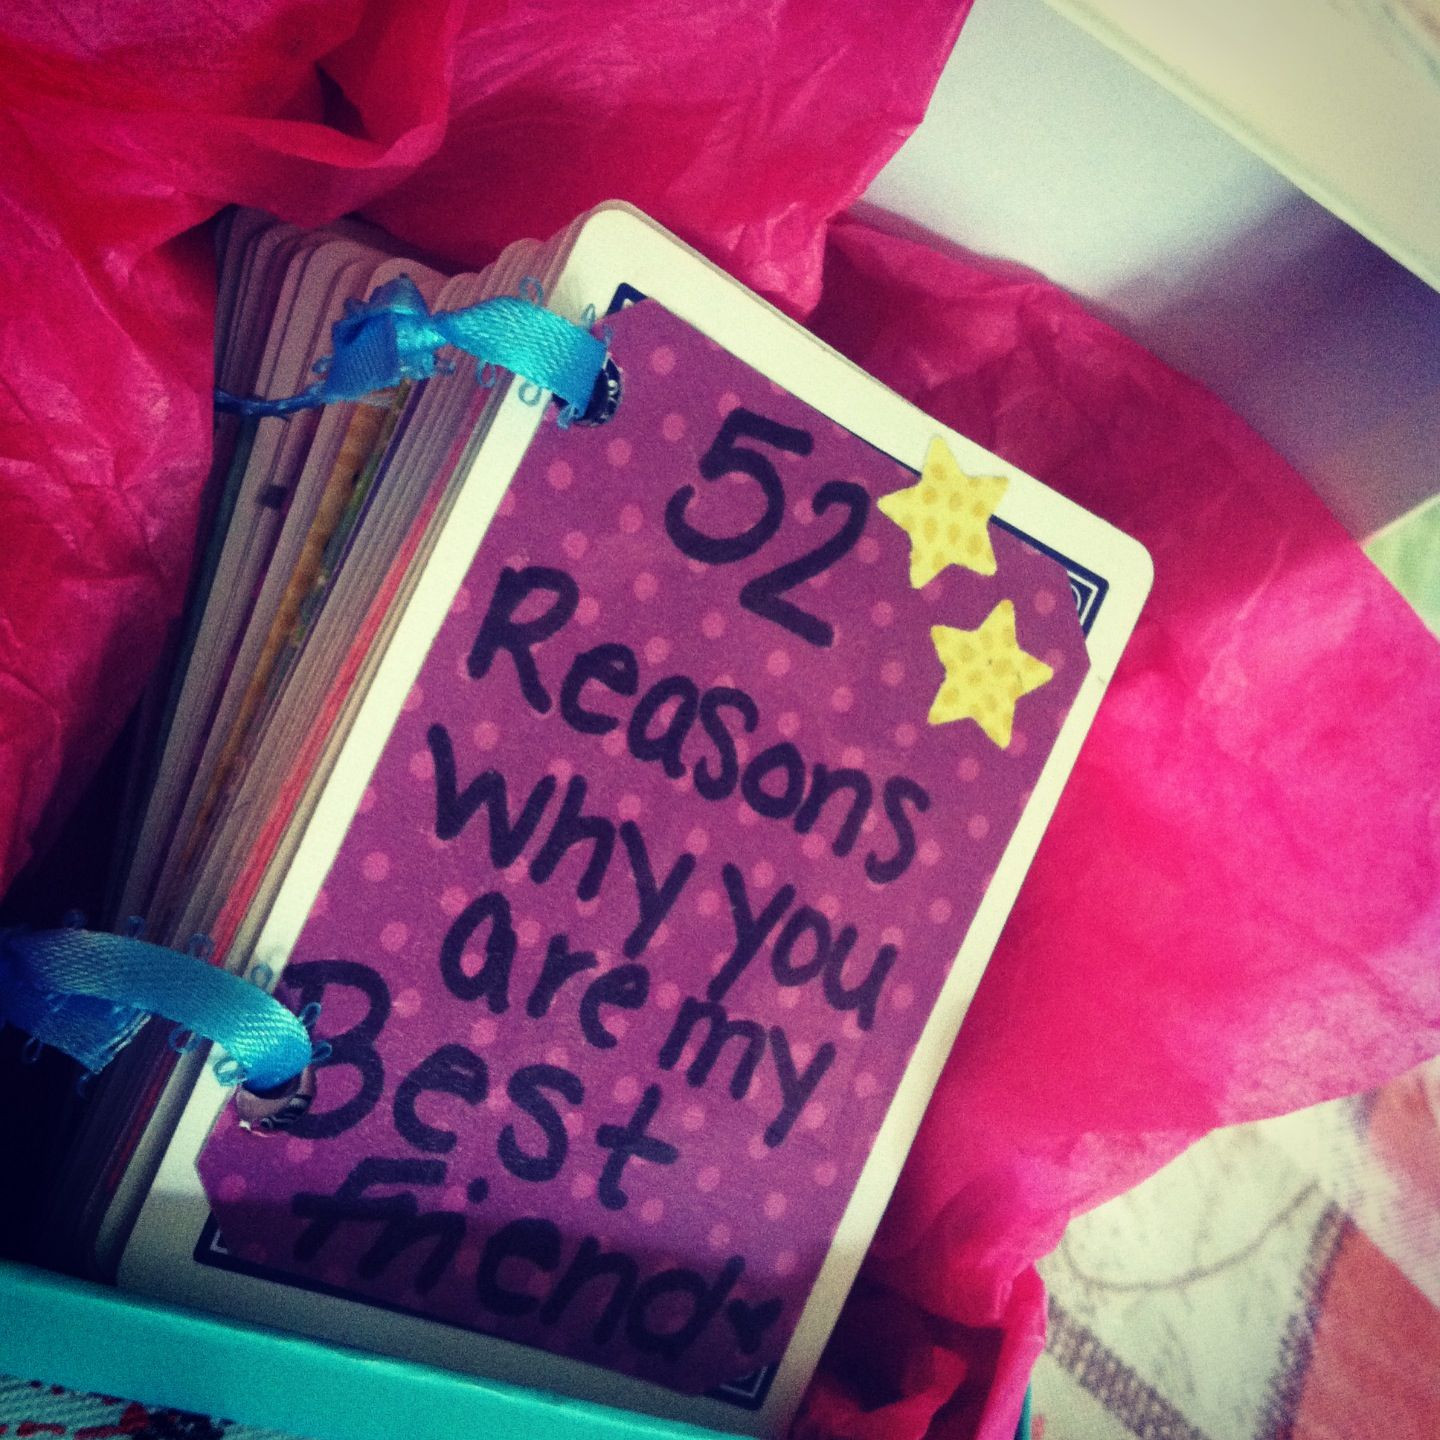 DIY Bff Gifts
 The 25 best Bff ts ideas on Pinterest